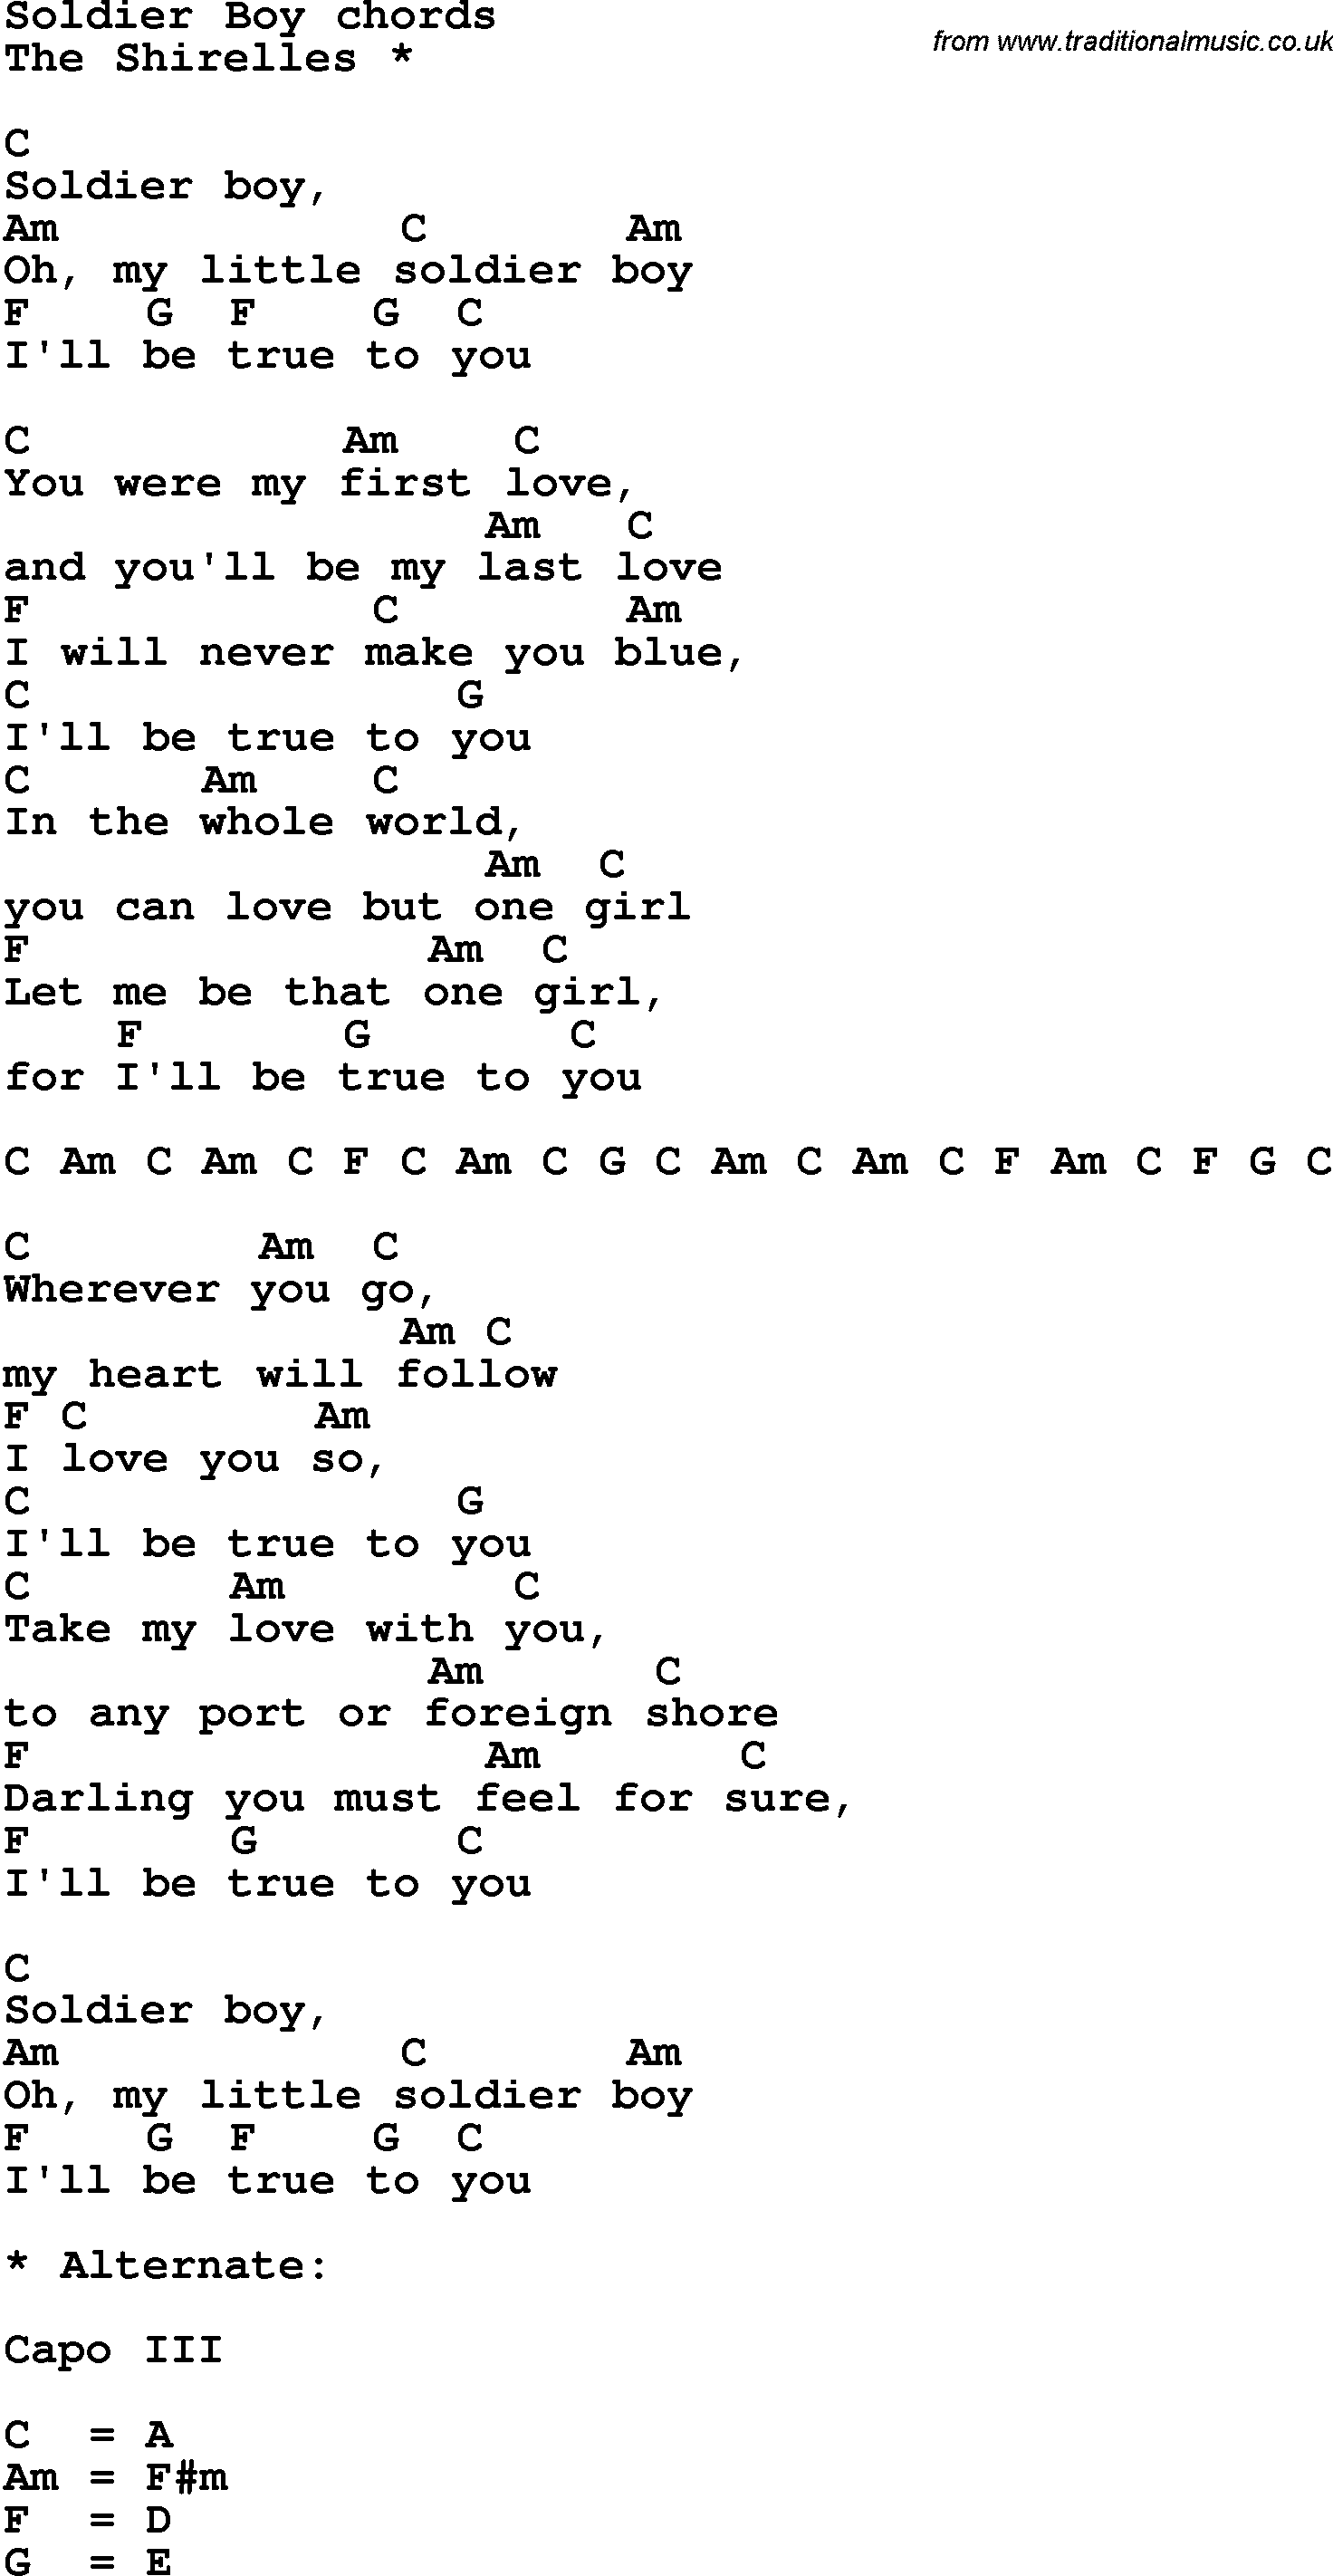 Song Lyrics with guitar chords for Soldier Boy